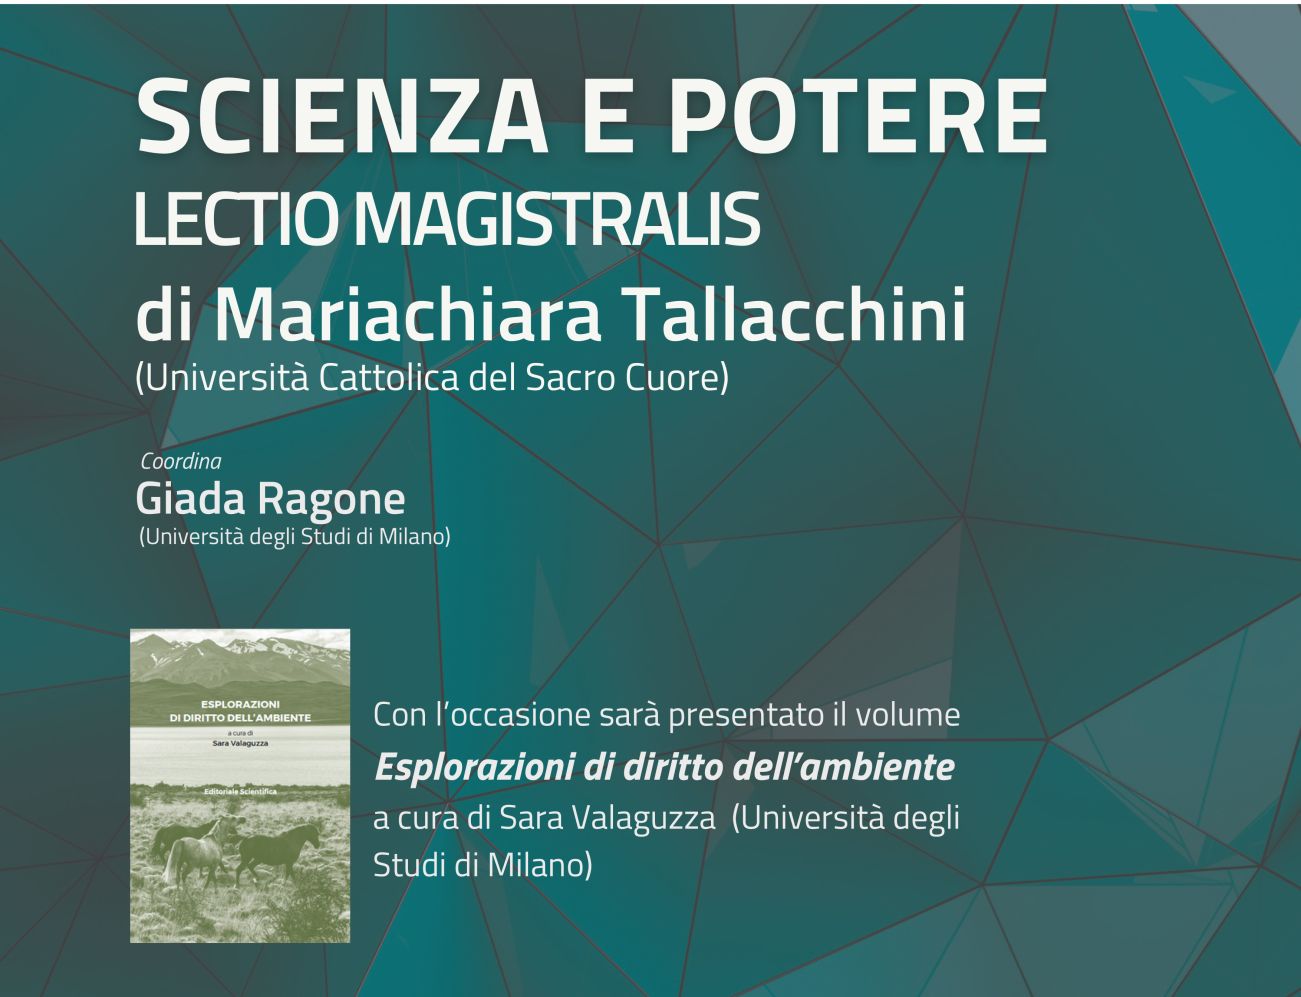 'Science and Power' in the Environmental Era, an in-depth analysis of legal dynamics in Professor Mariachiara Tallacchini's Lectio Magistralis